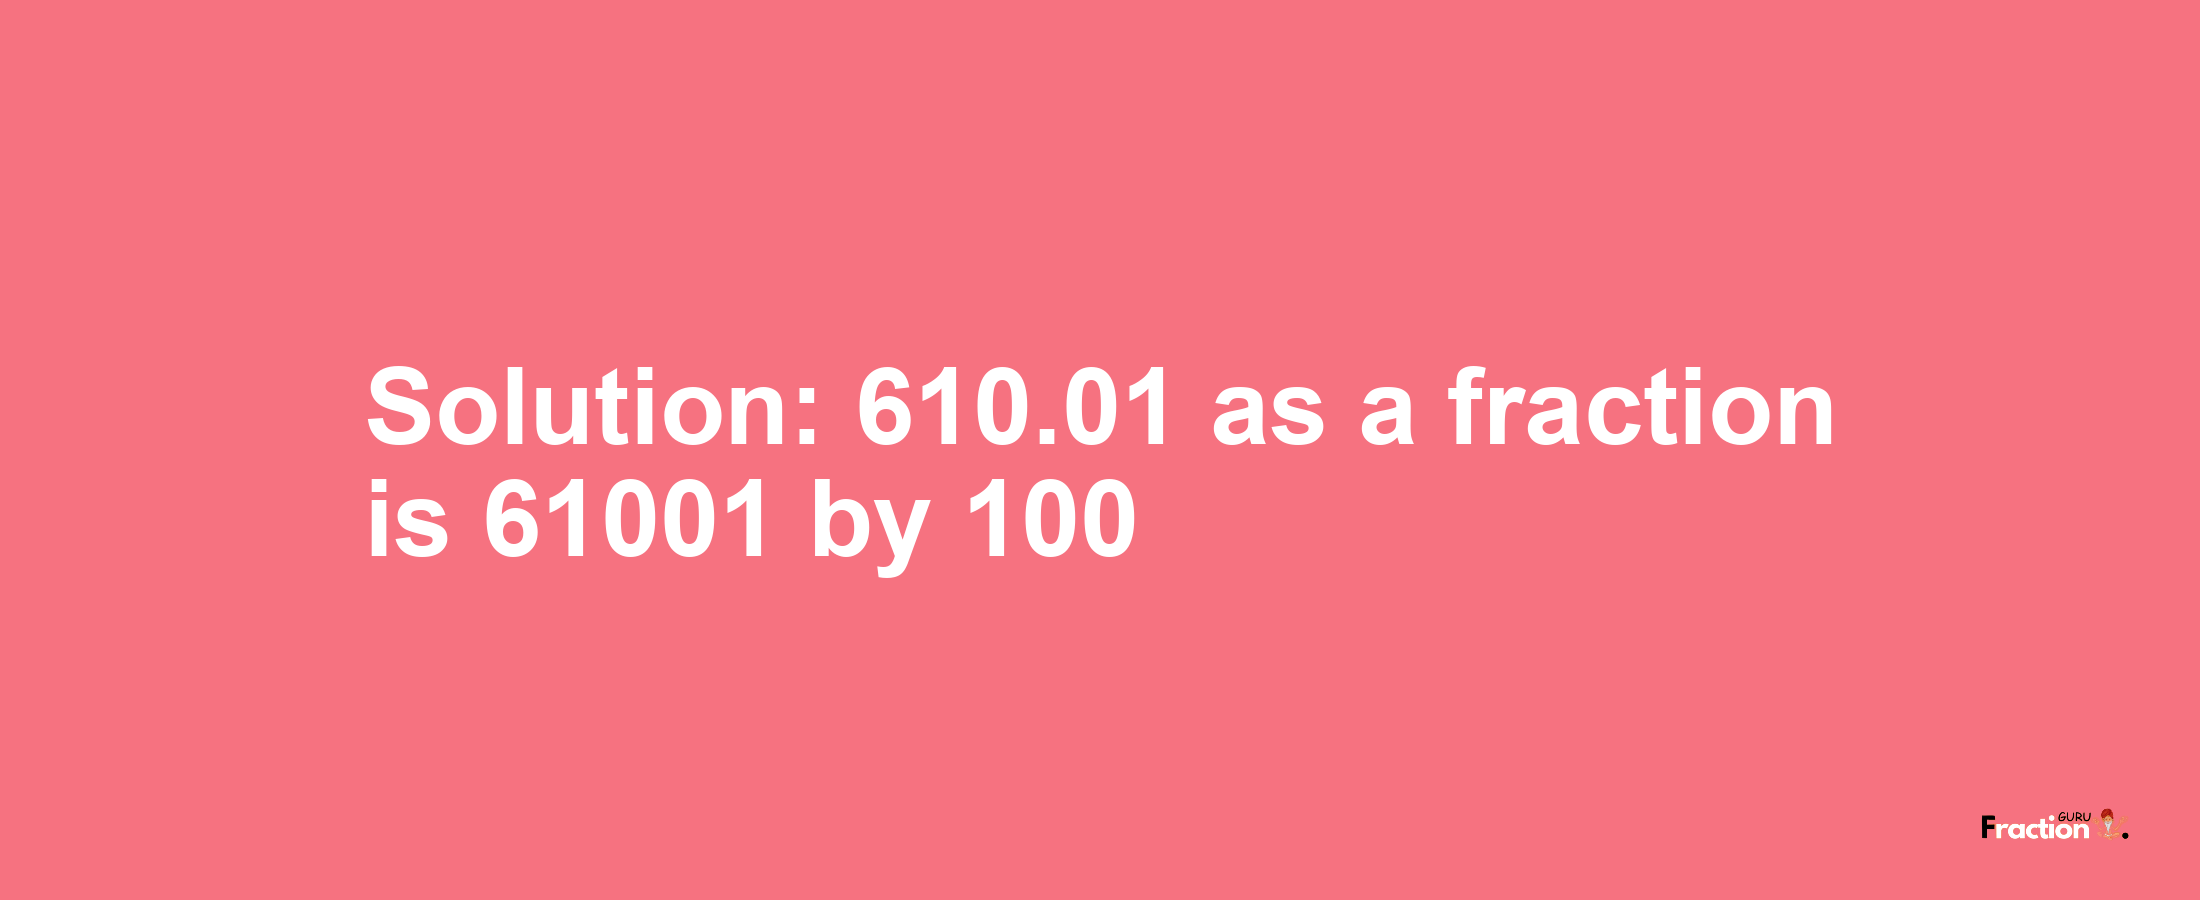 Solution:610.01 as a fraction is 61001/100